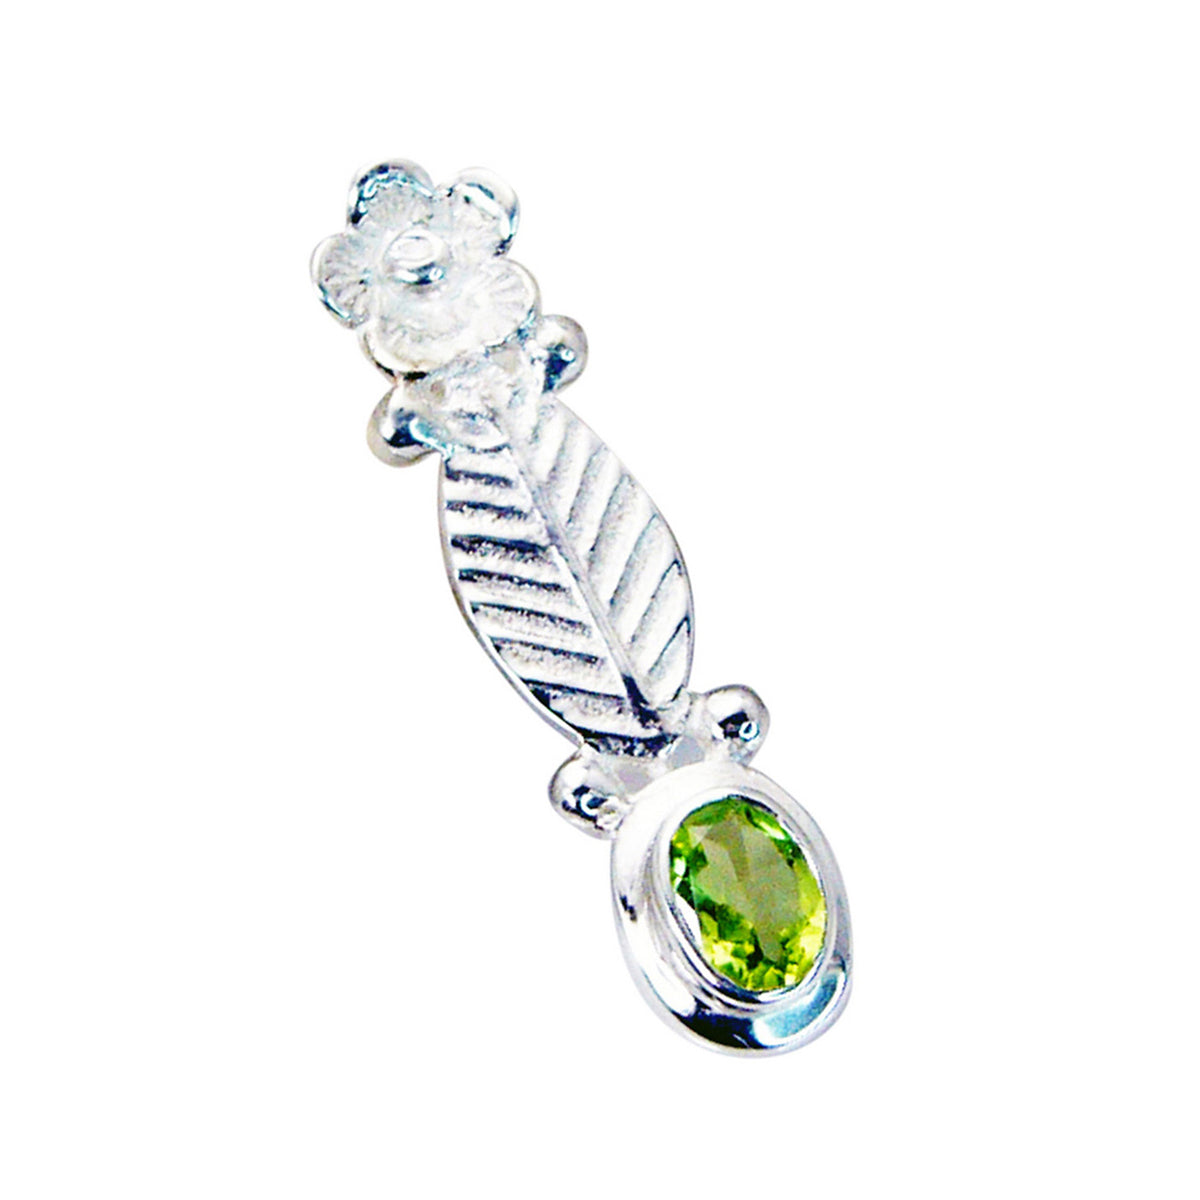 Riyo Smashing Gemstone Oval Faceted Green Peridot 958 Sterling Silver Pendant Gift For Good Friday